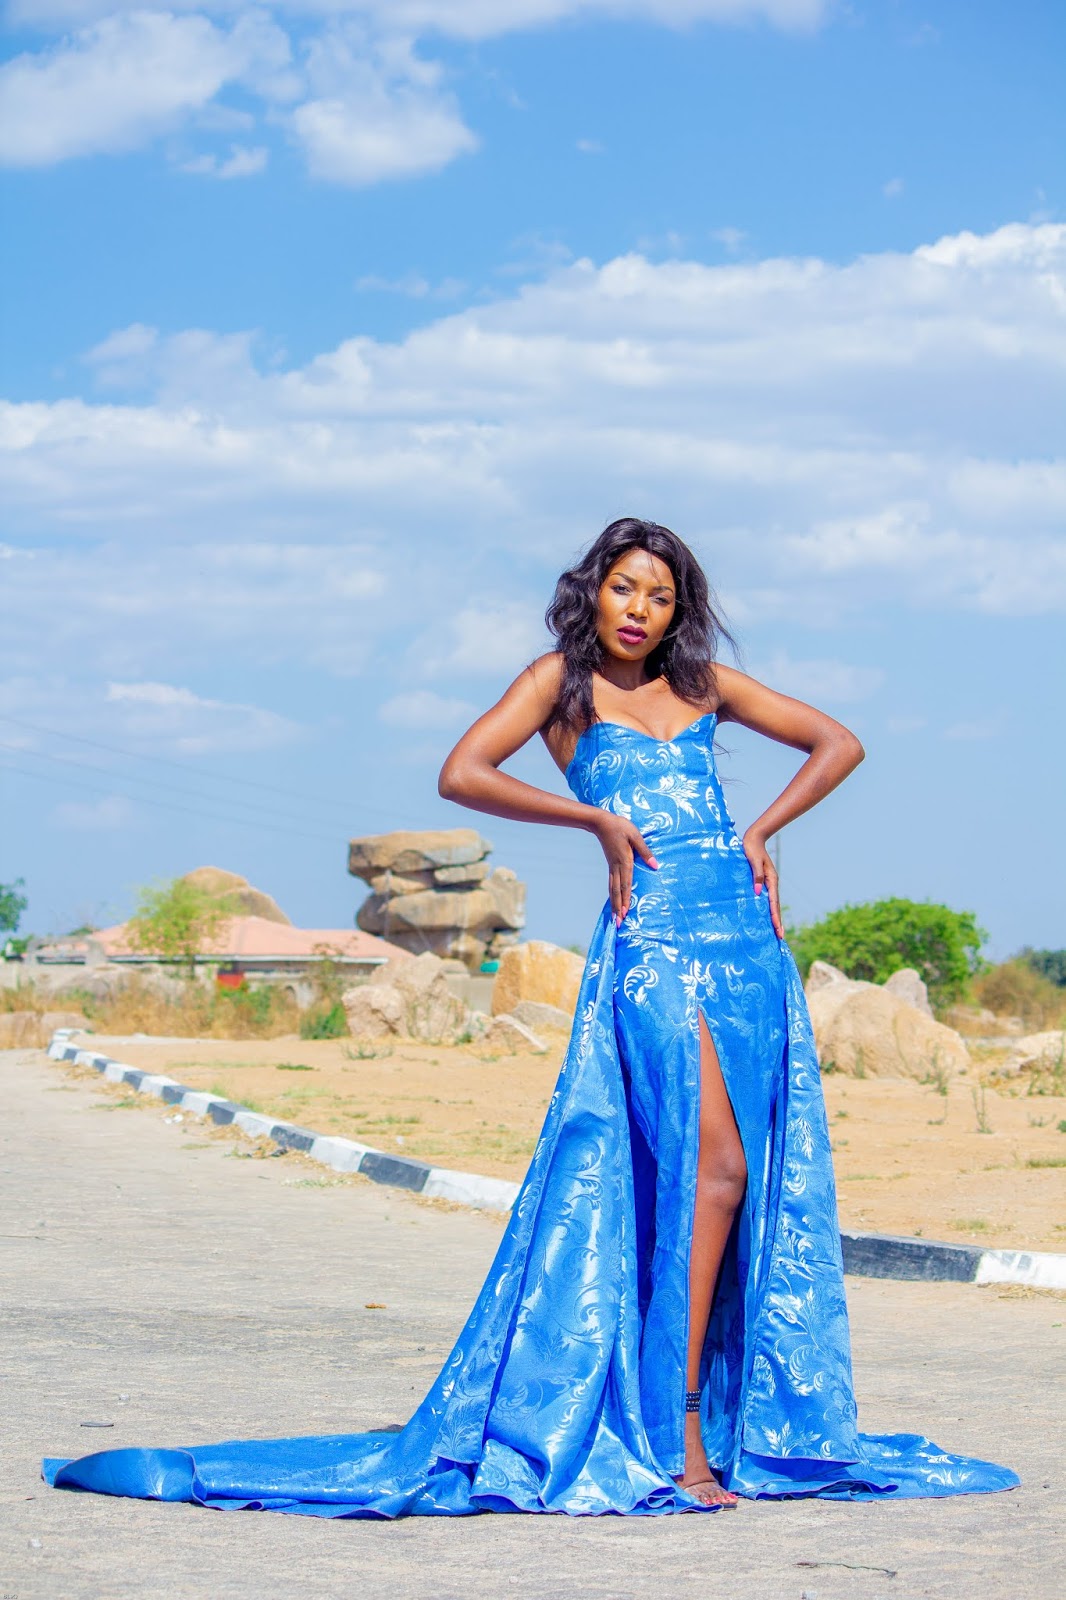 Tania Tatenda Aaron Poses For A Photoshoot with Blaq Studios In A Beautiful SkyBlue Dress